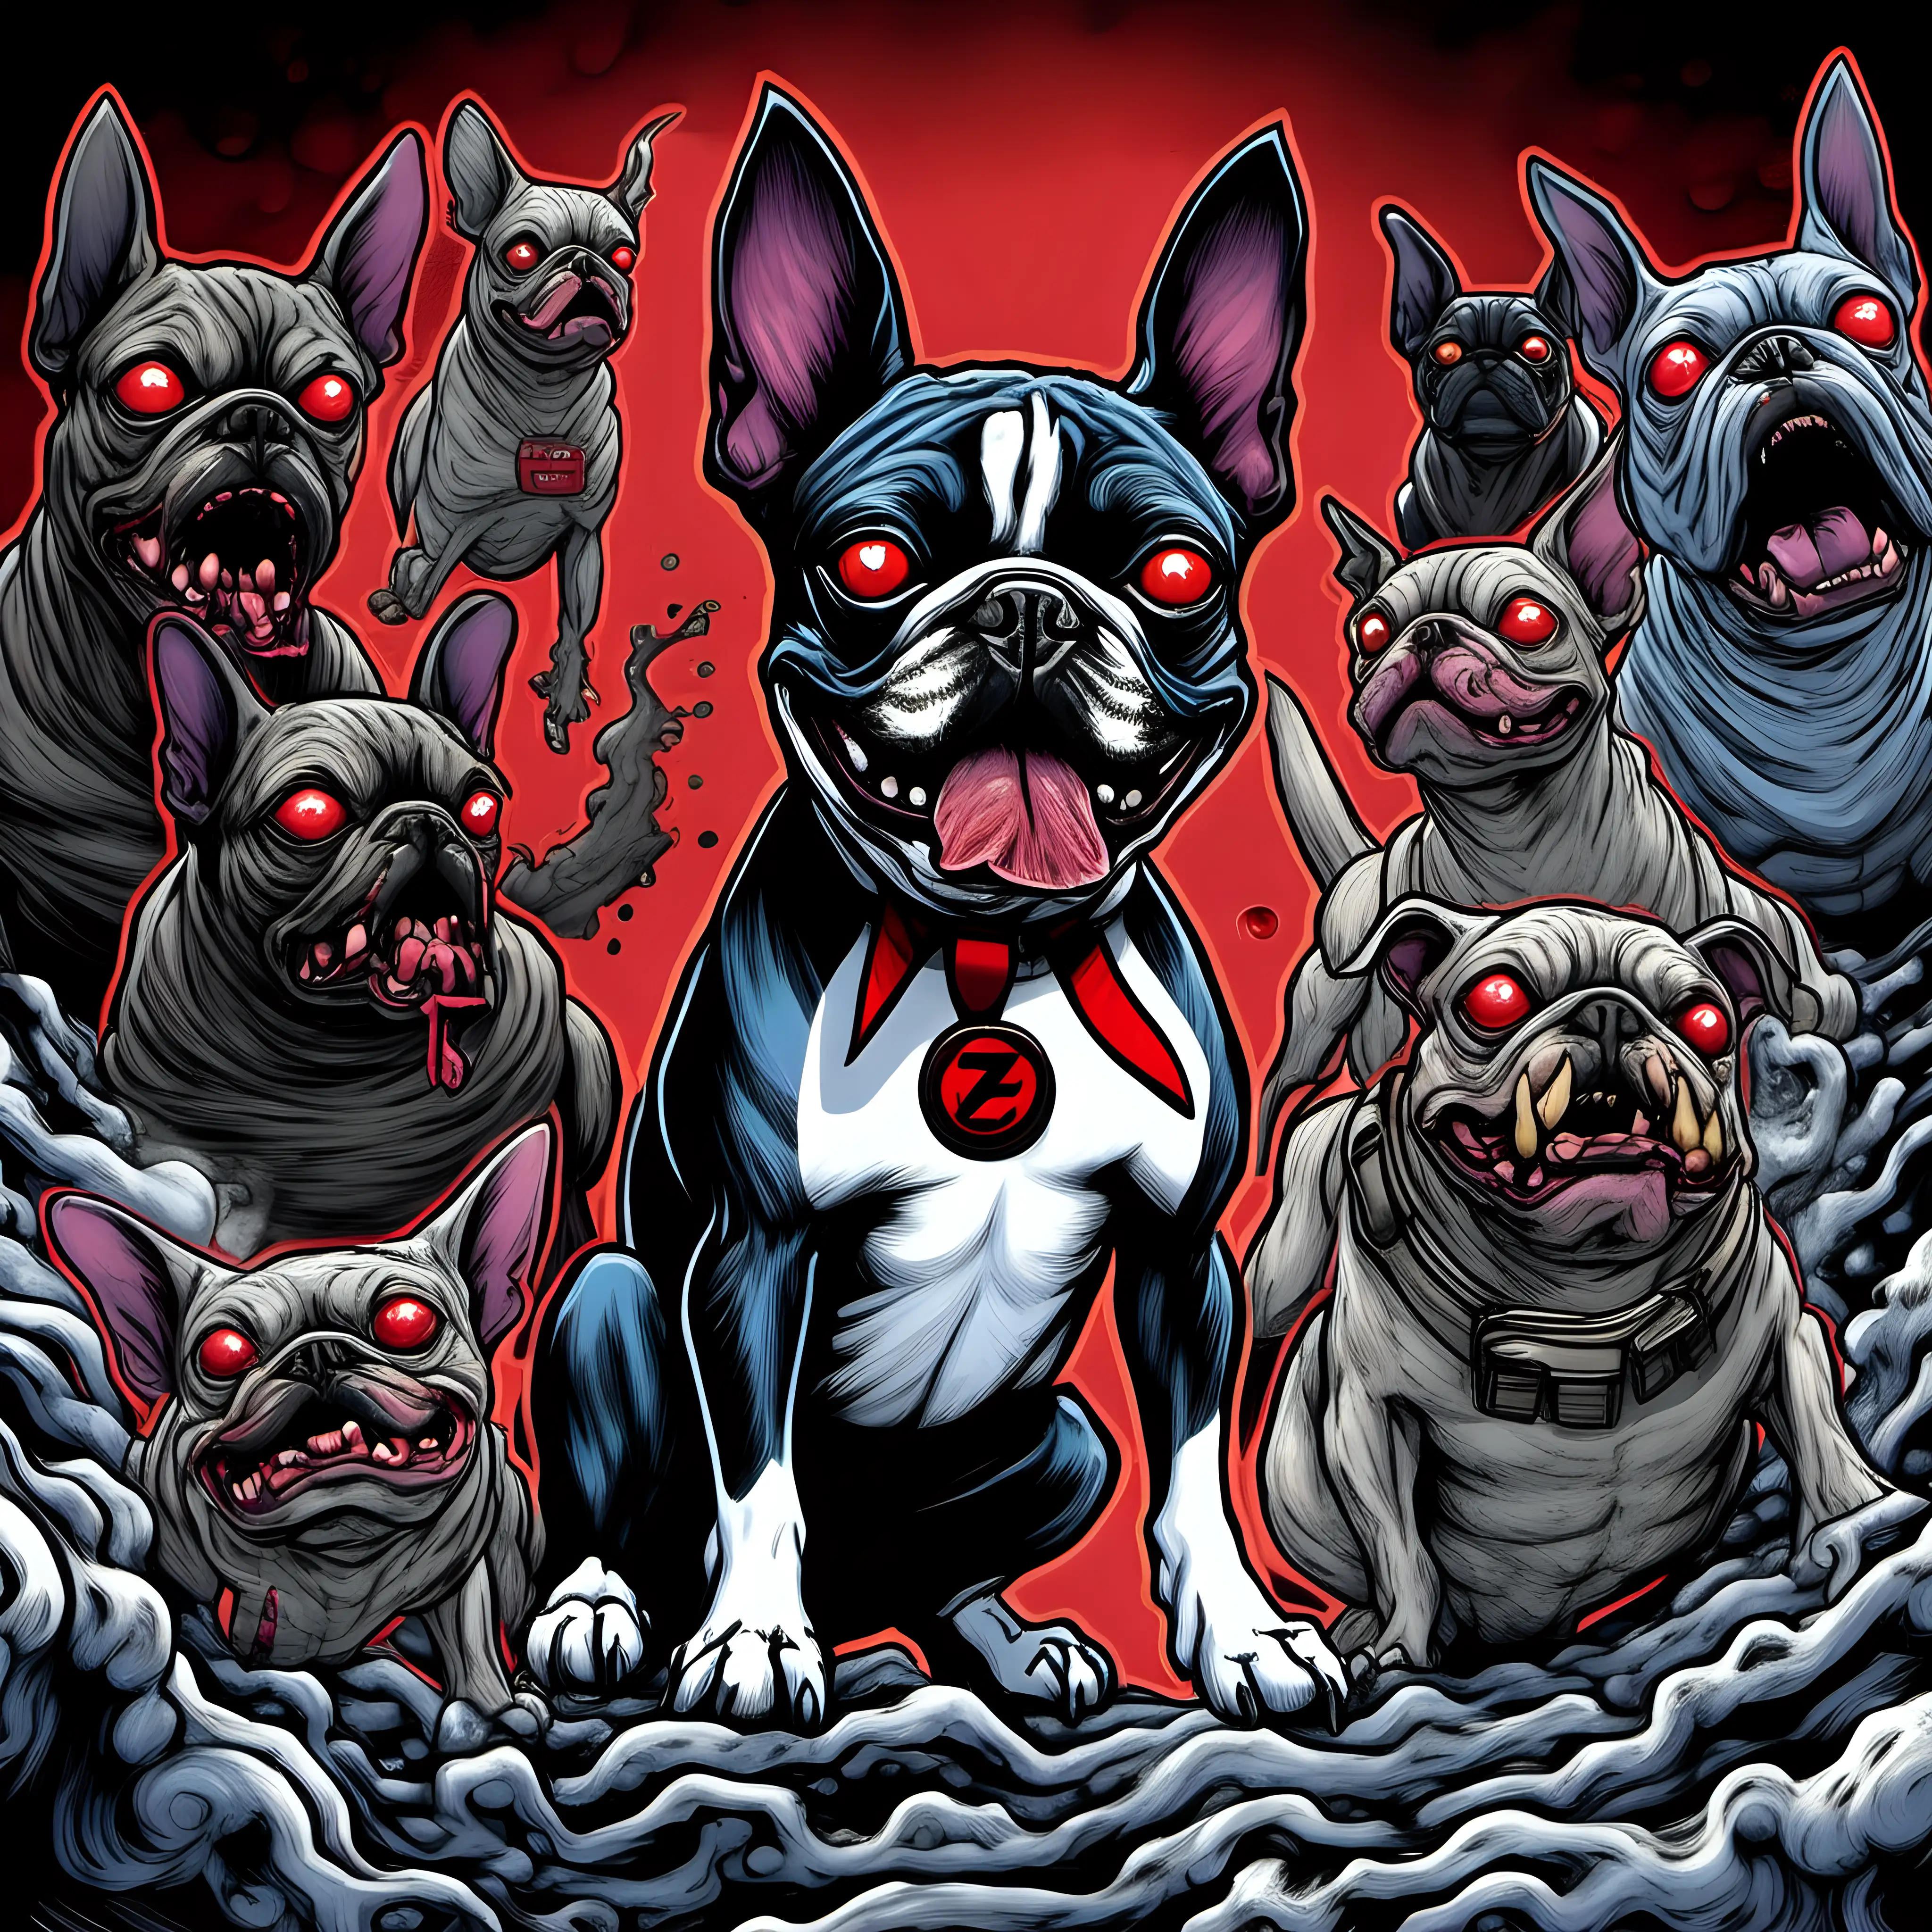 Zuul the Ghostbusters Boston Terrier with Creepy Red Eyes Comic Style Drawing